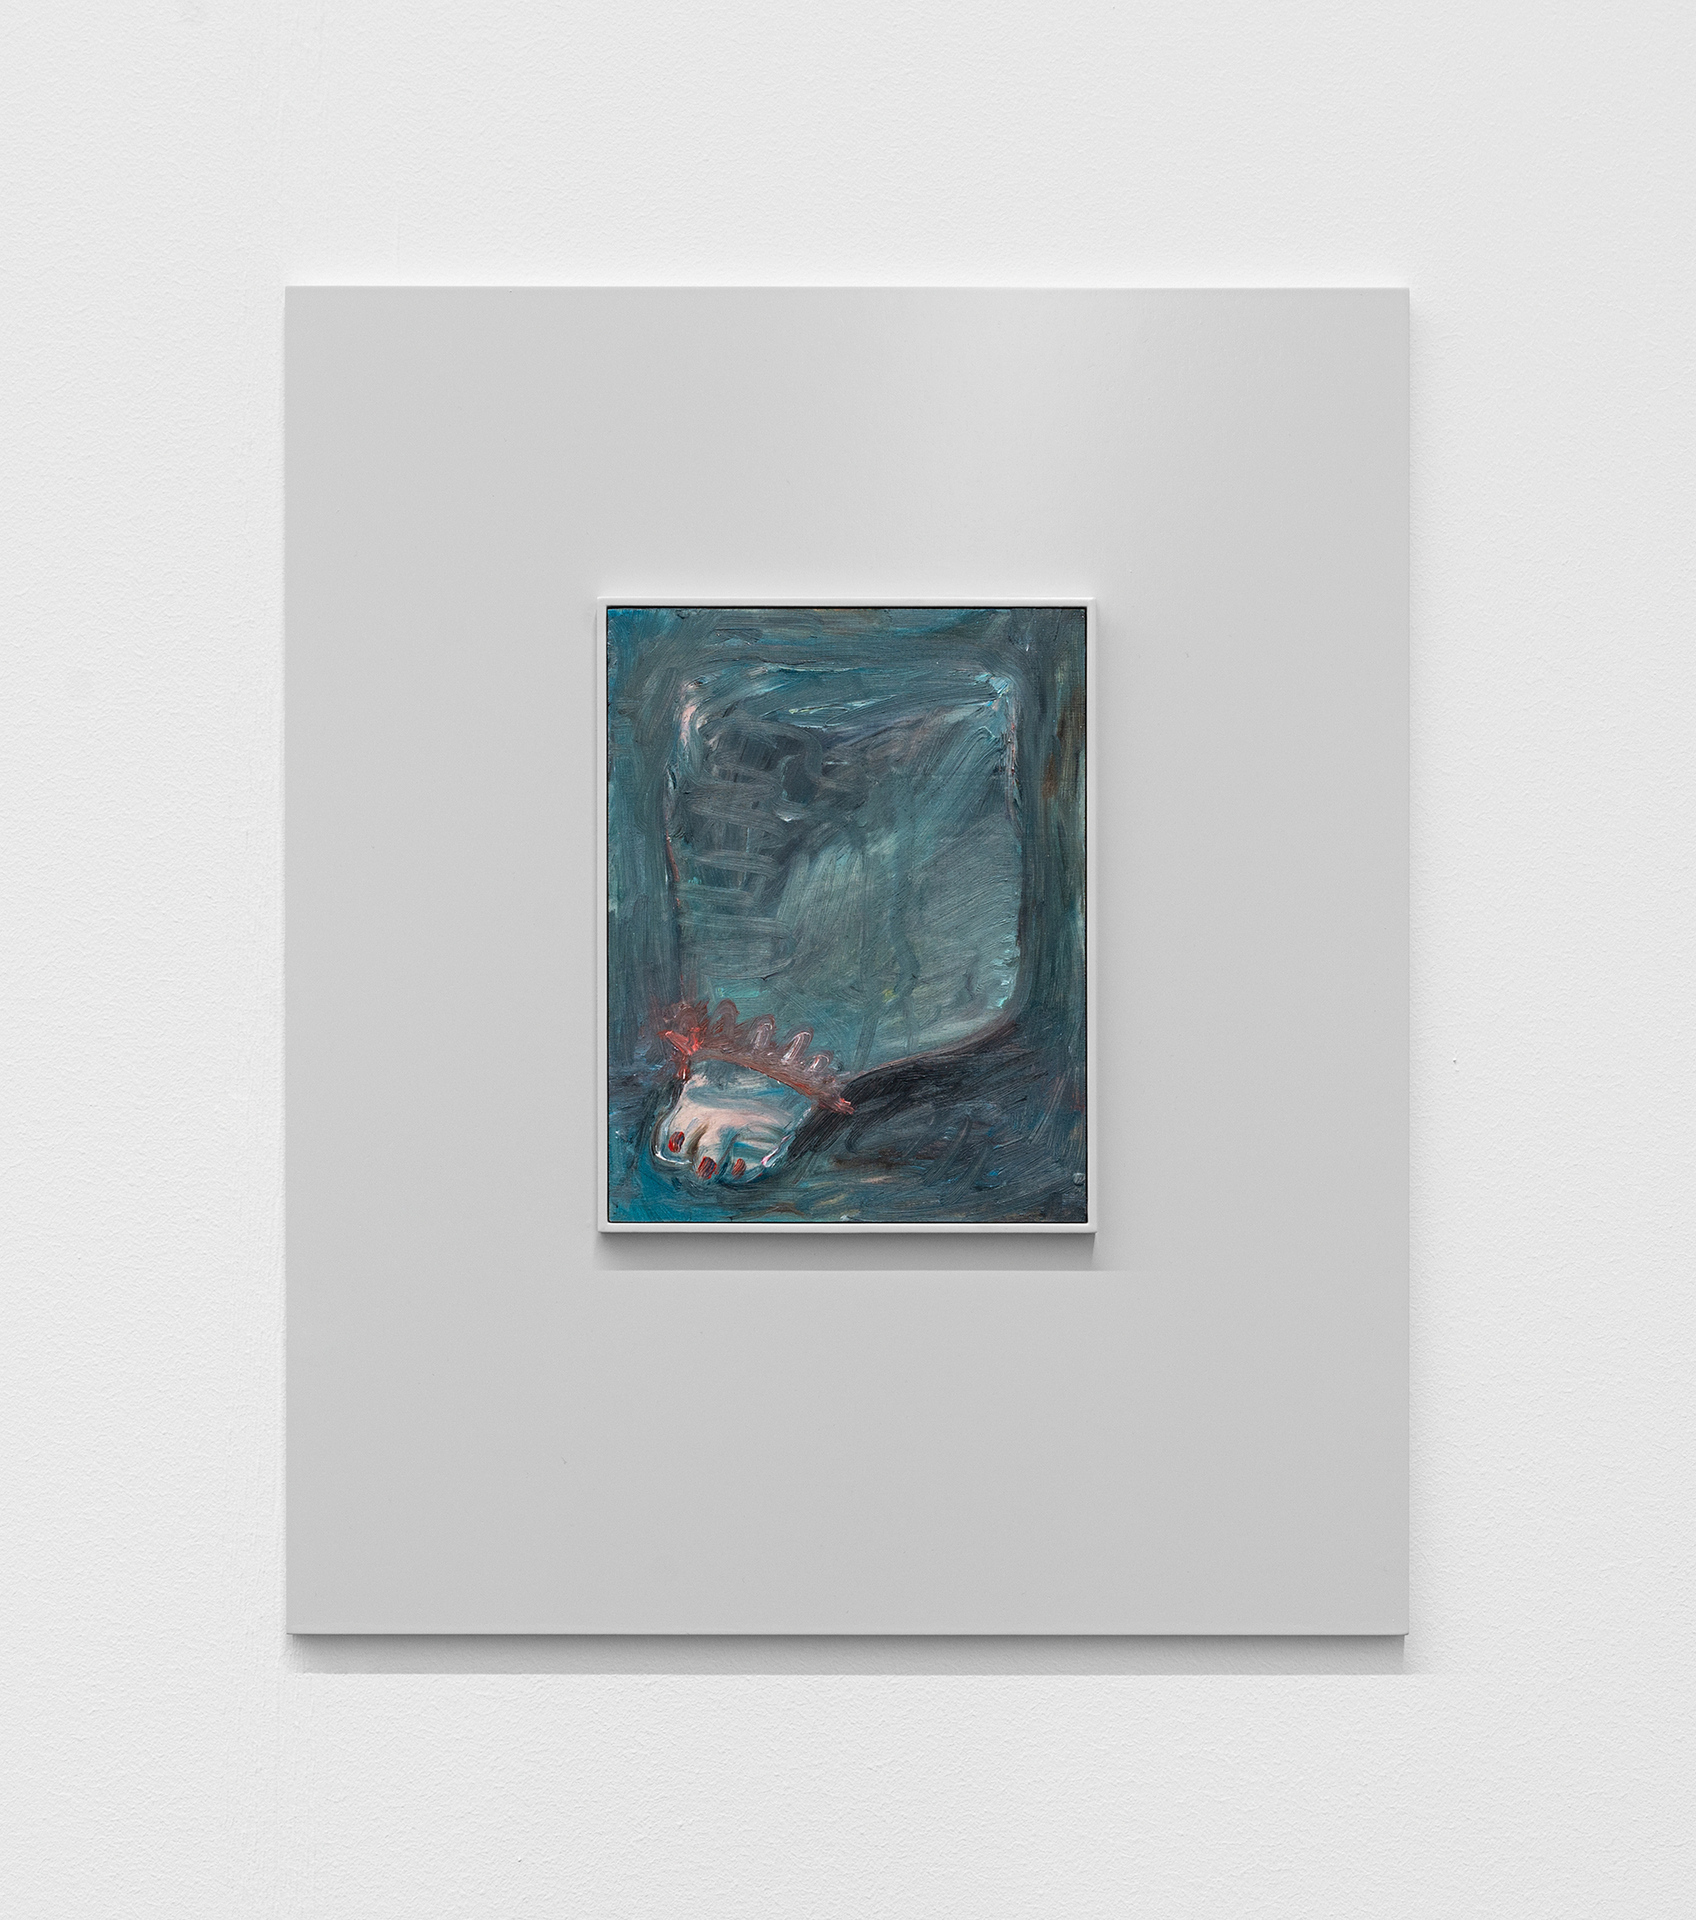 Camillo Paravicini, Untitled, 2020, Oil on wood in wooden frame, 60 x 50 cm